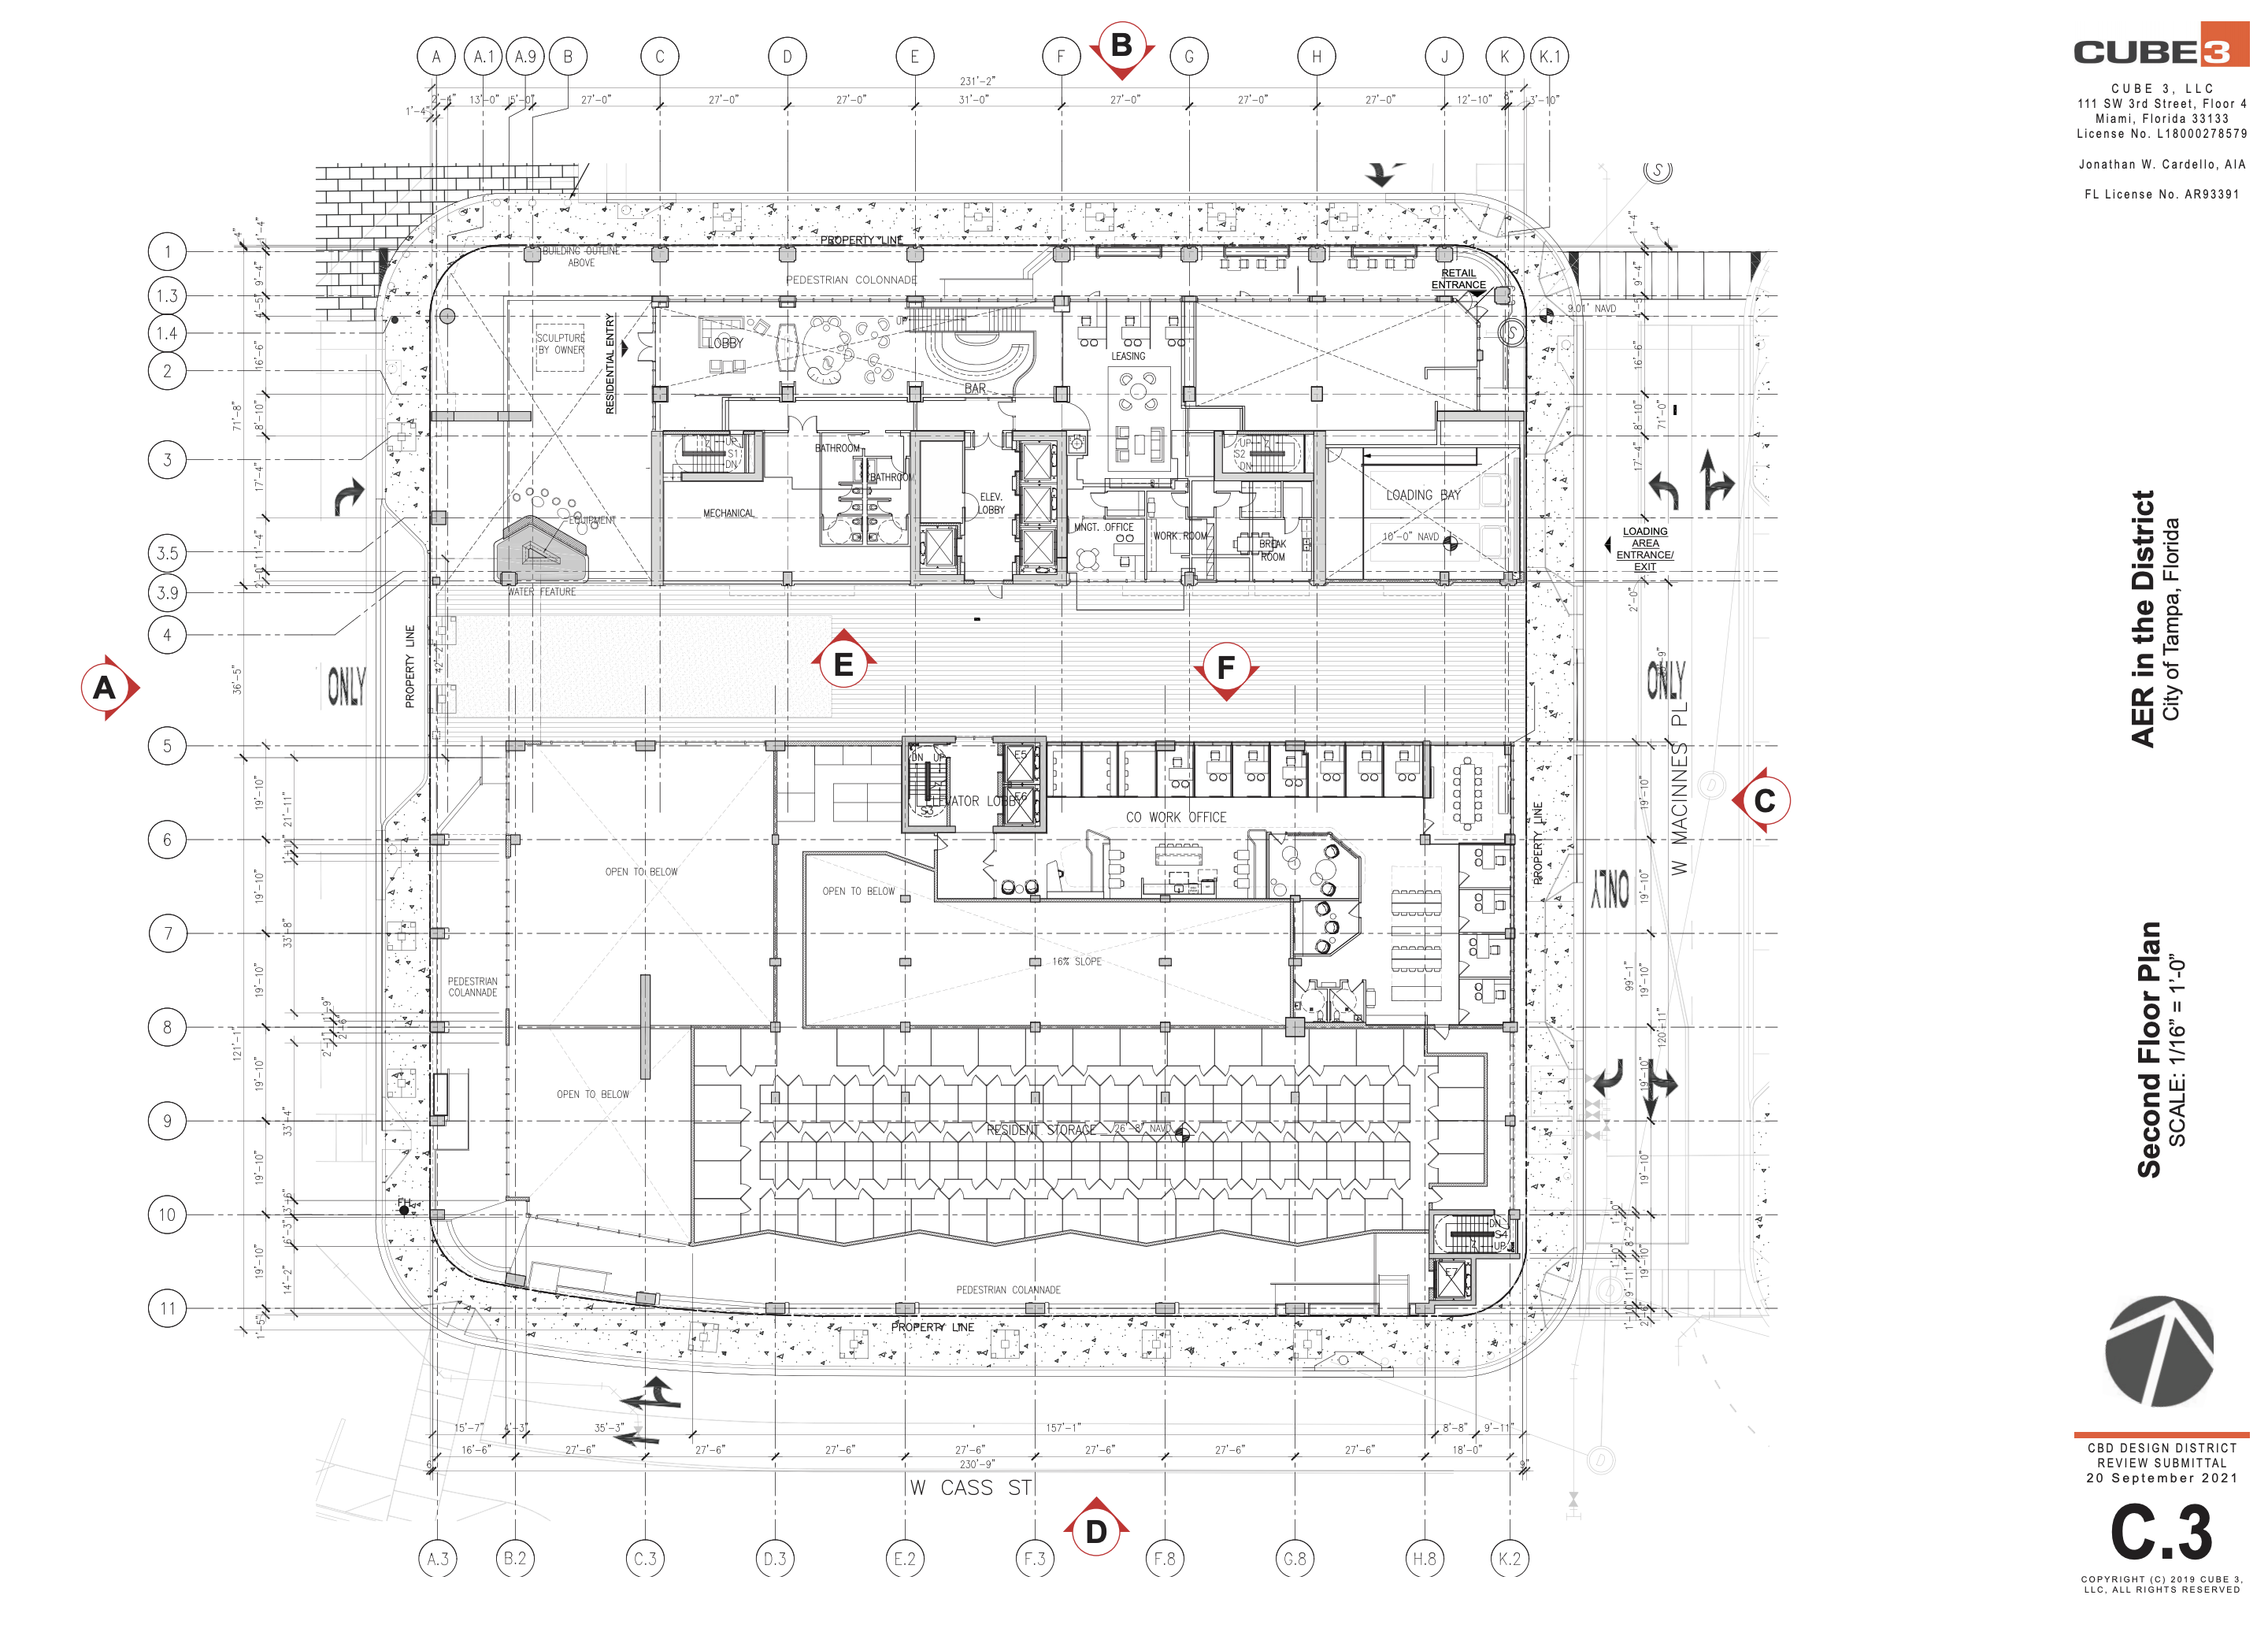 Second Floor Plan. Courtesy of Cube 3.